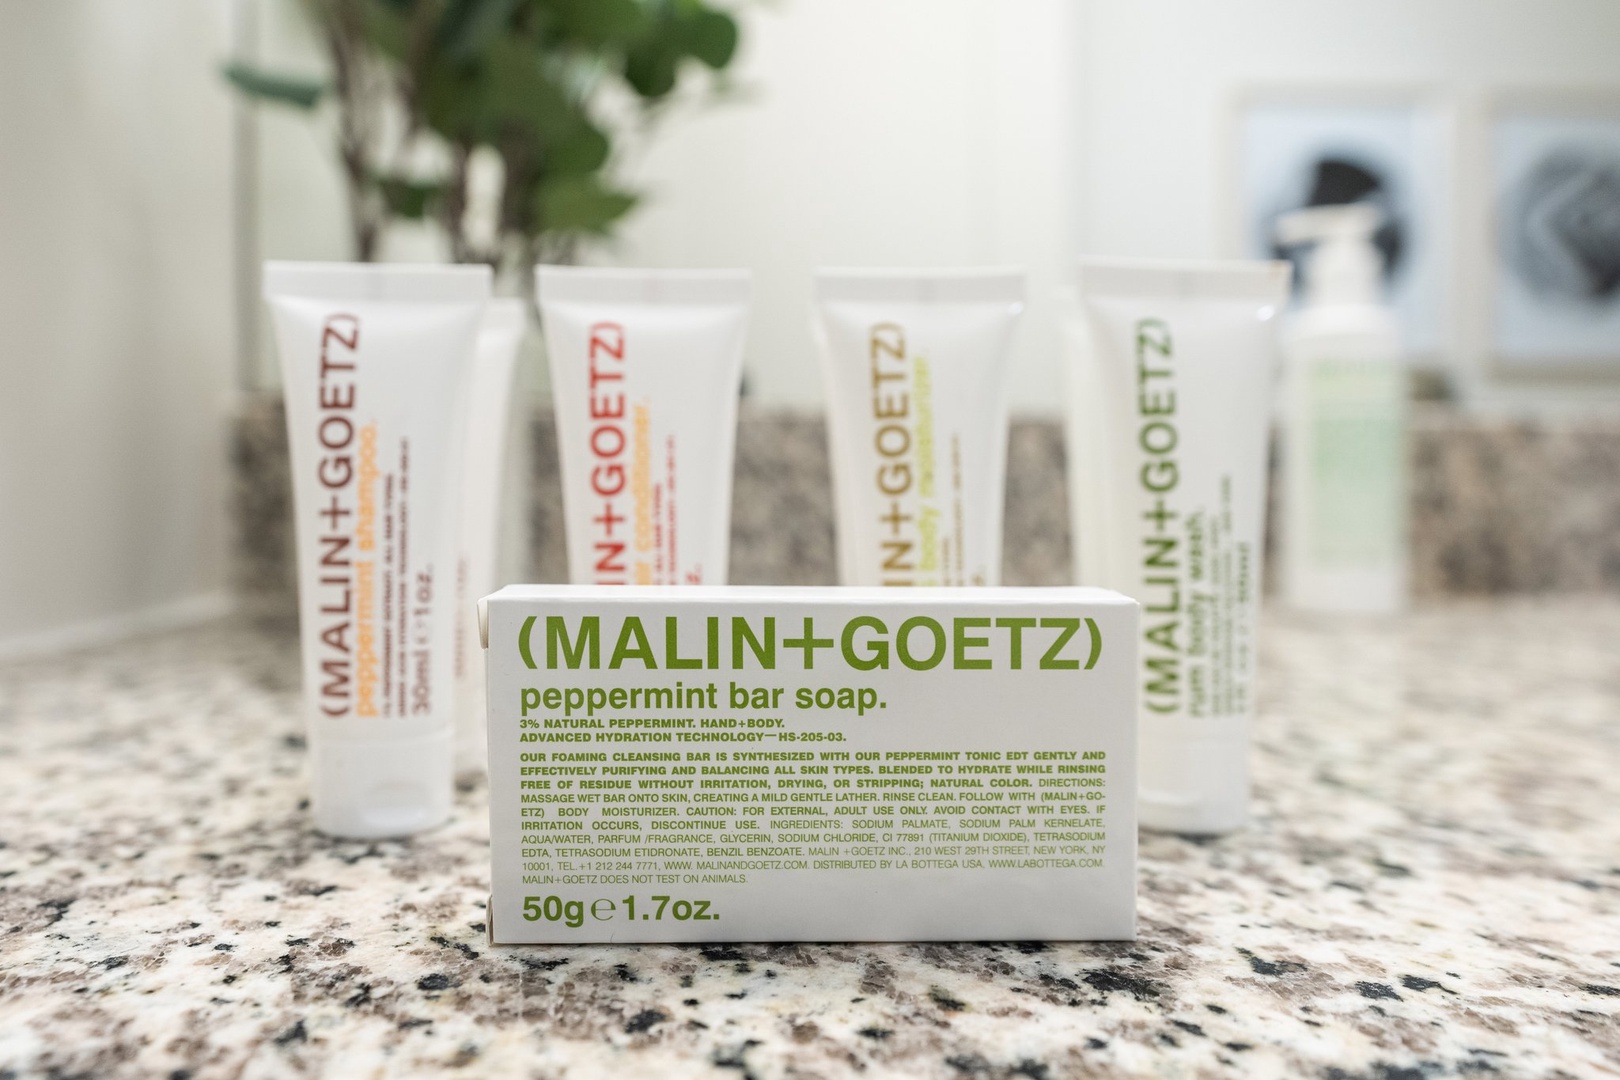 Pamper yourself with complimentary toiletries by Malin + Goetz in the bathroom.